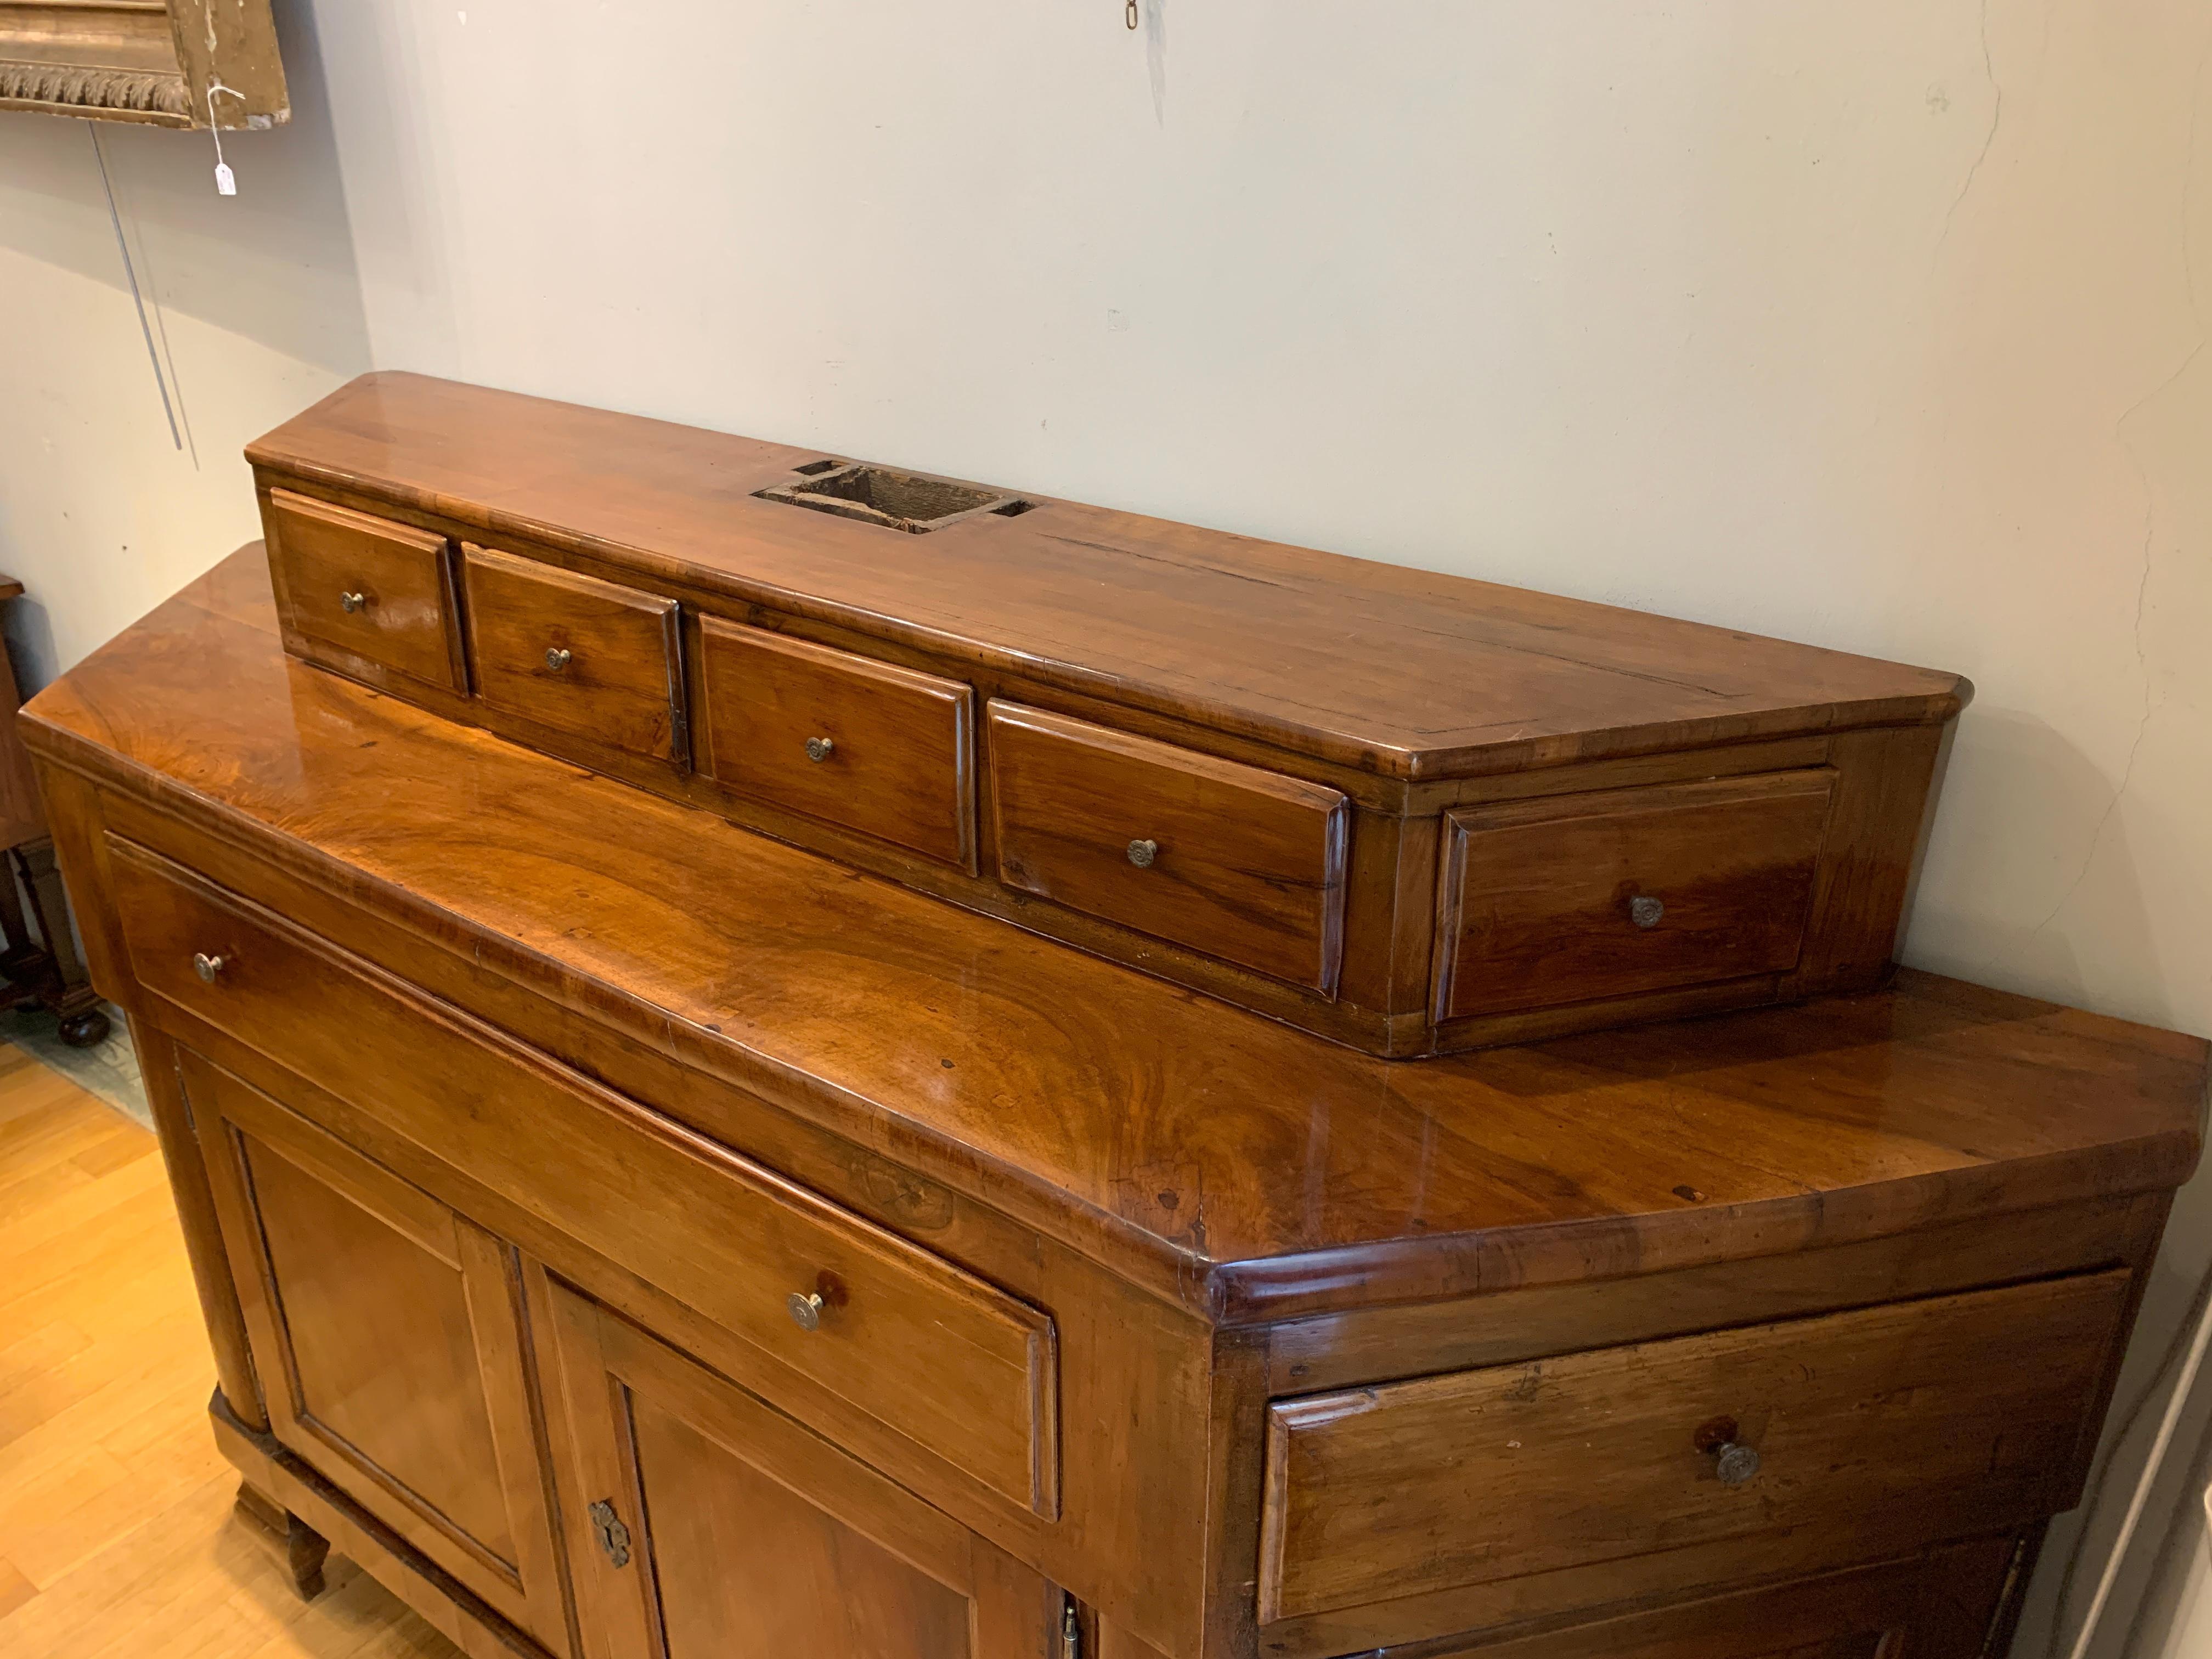 END OF THE 18th CENTURY NOTCHED SIDEBOARD For Sale 3